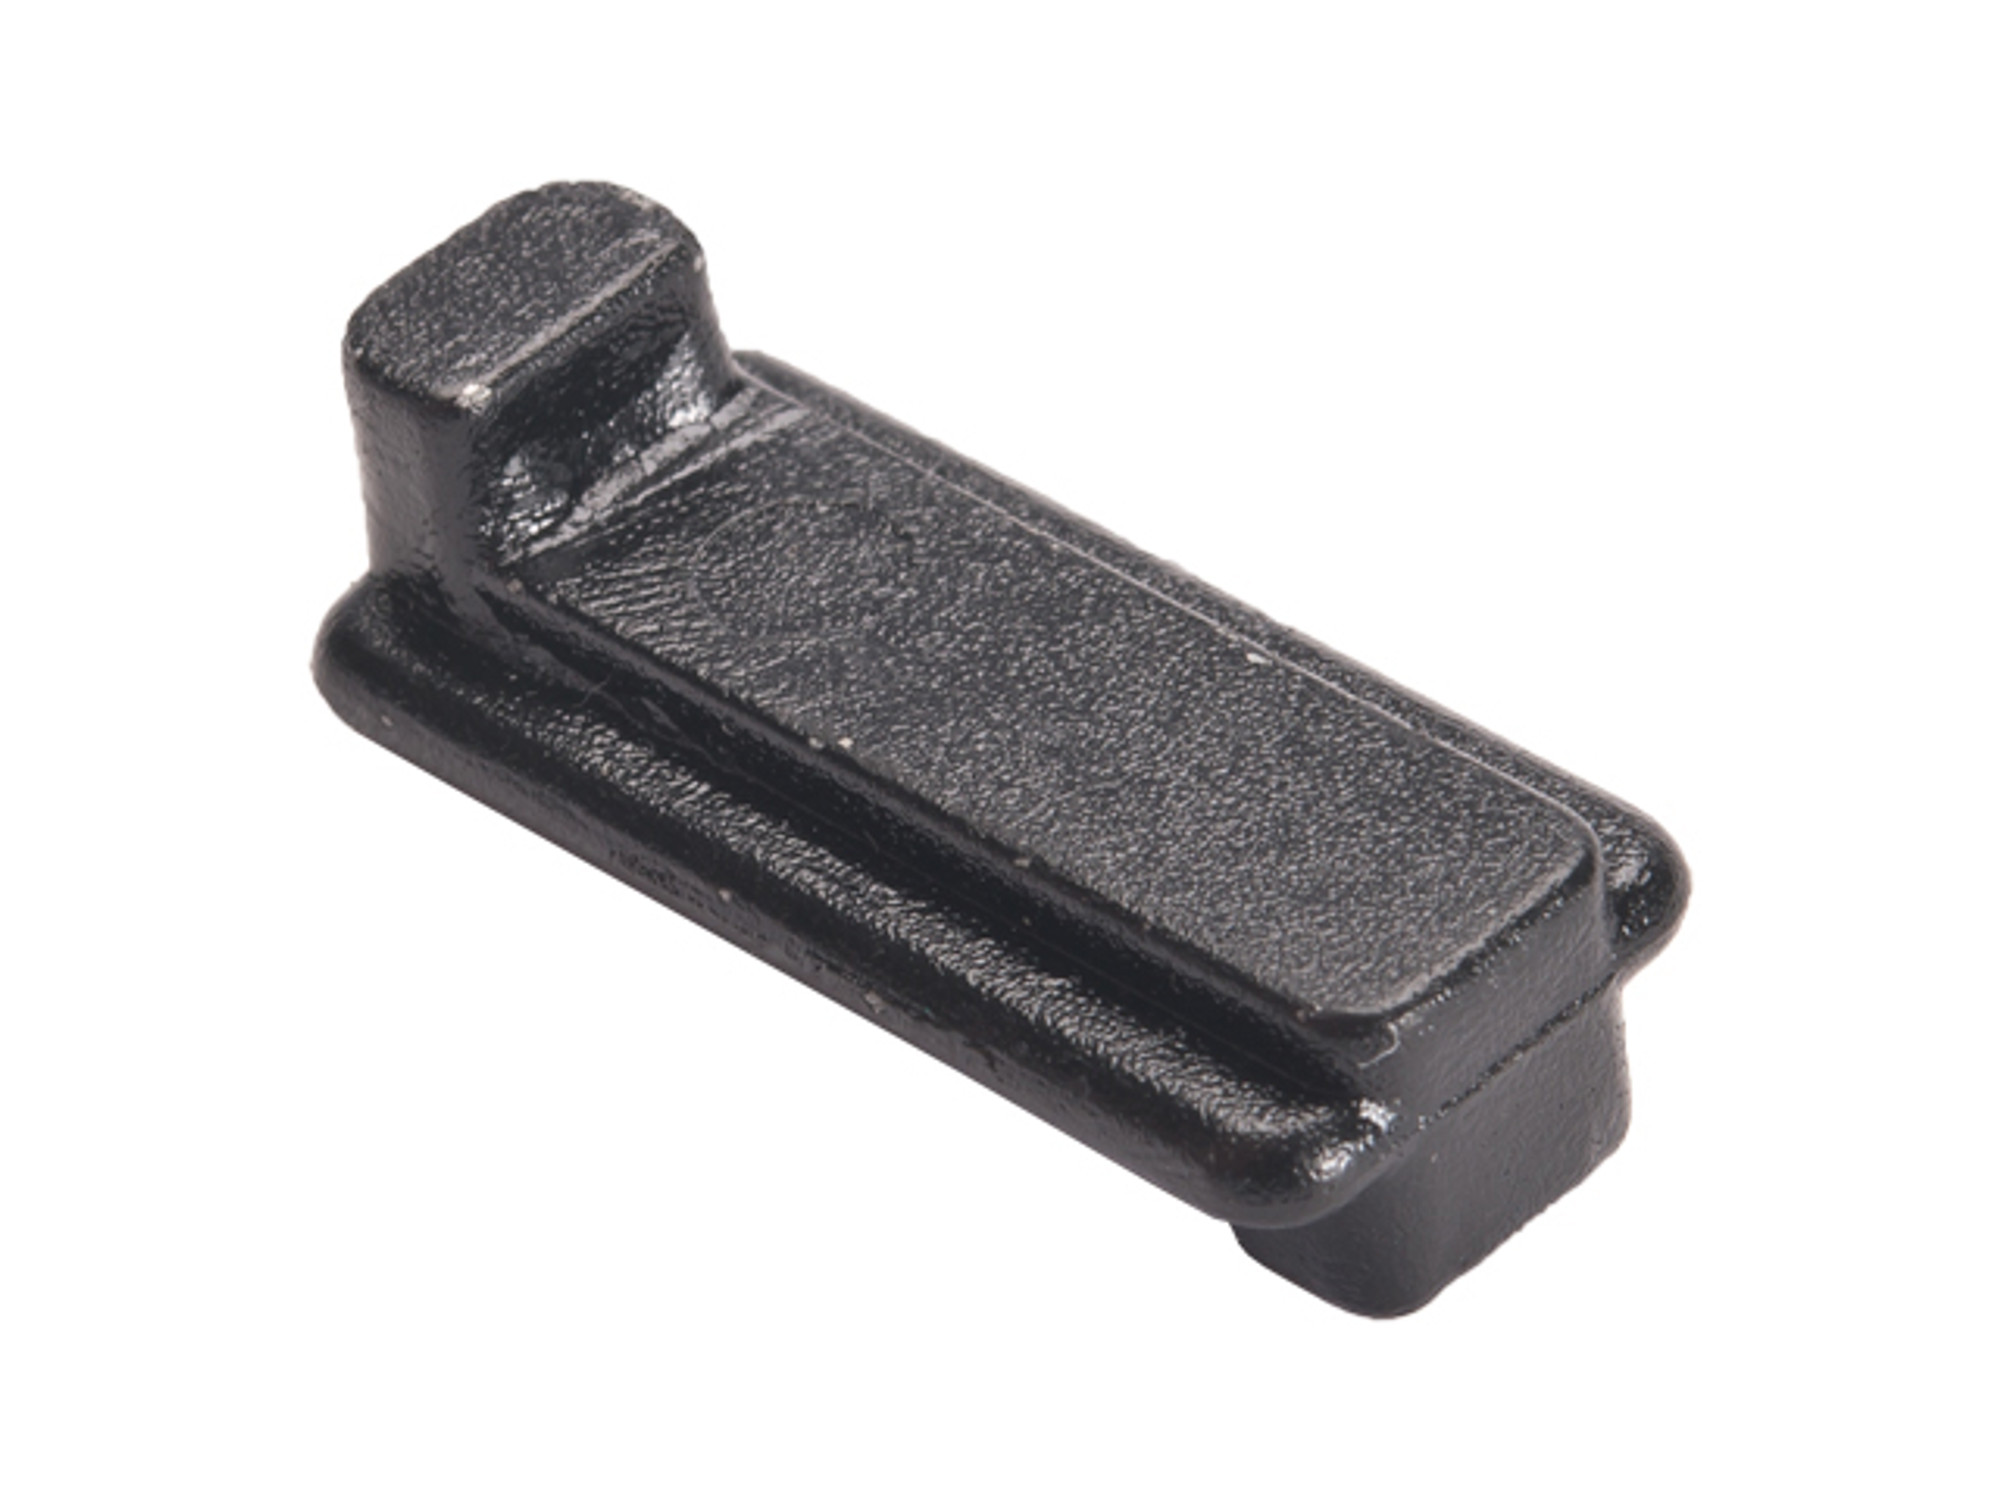 Replacement Part for S&T PPSH Airsoft AEG Rifle - Part #B4